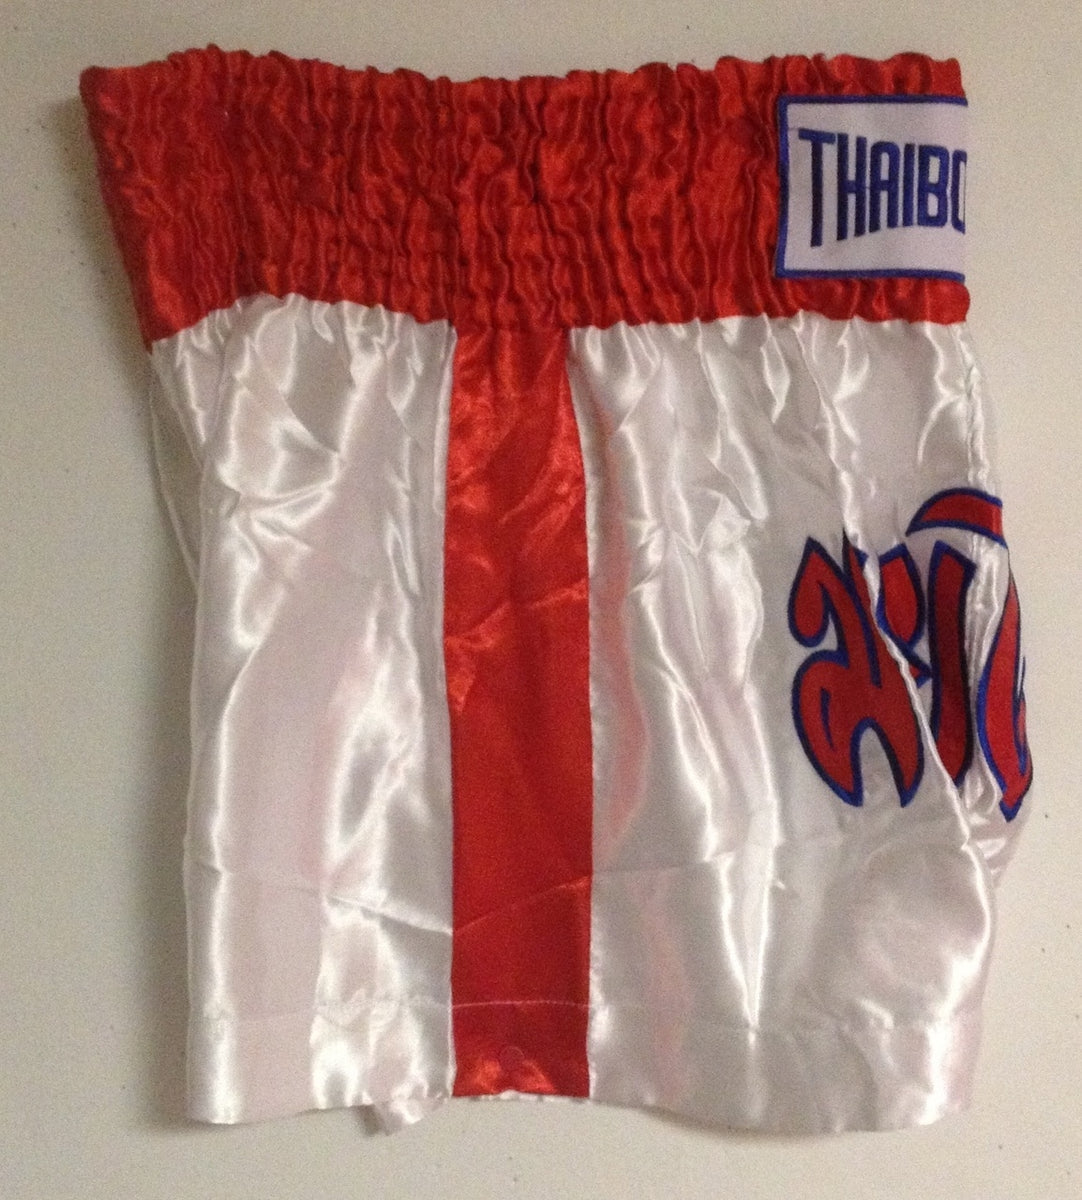 Muay Thai Boxing Shorts Red White, affordable and direct from Thailand